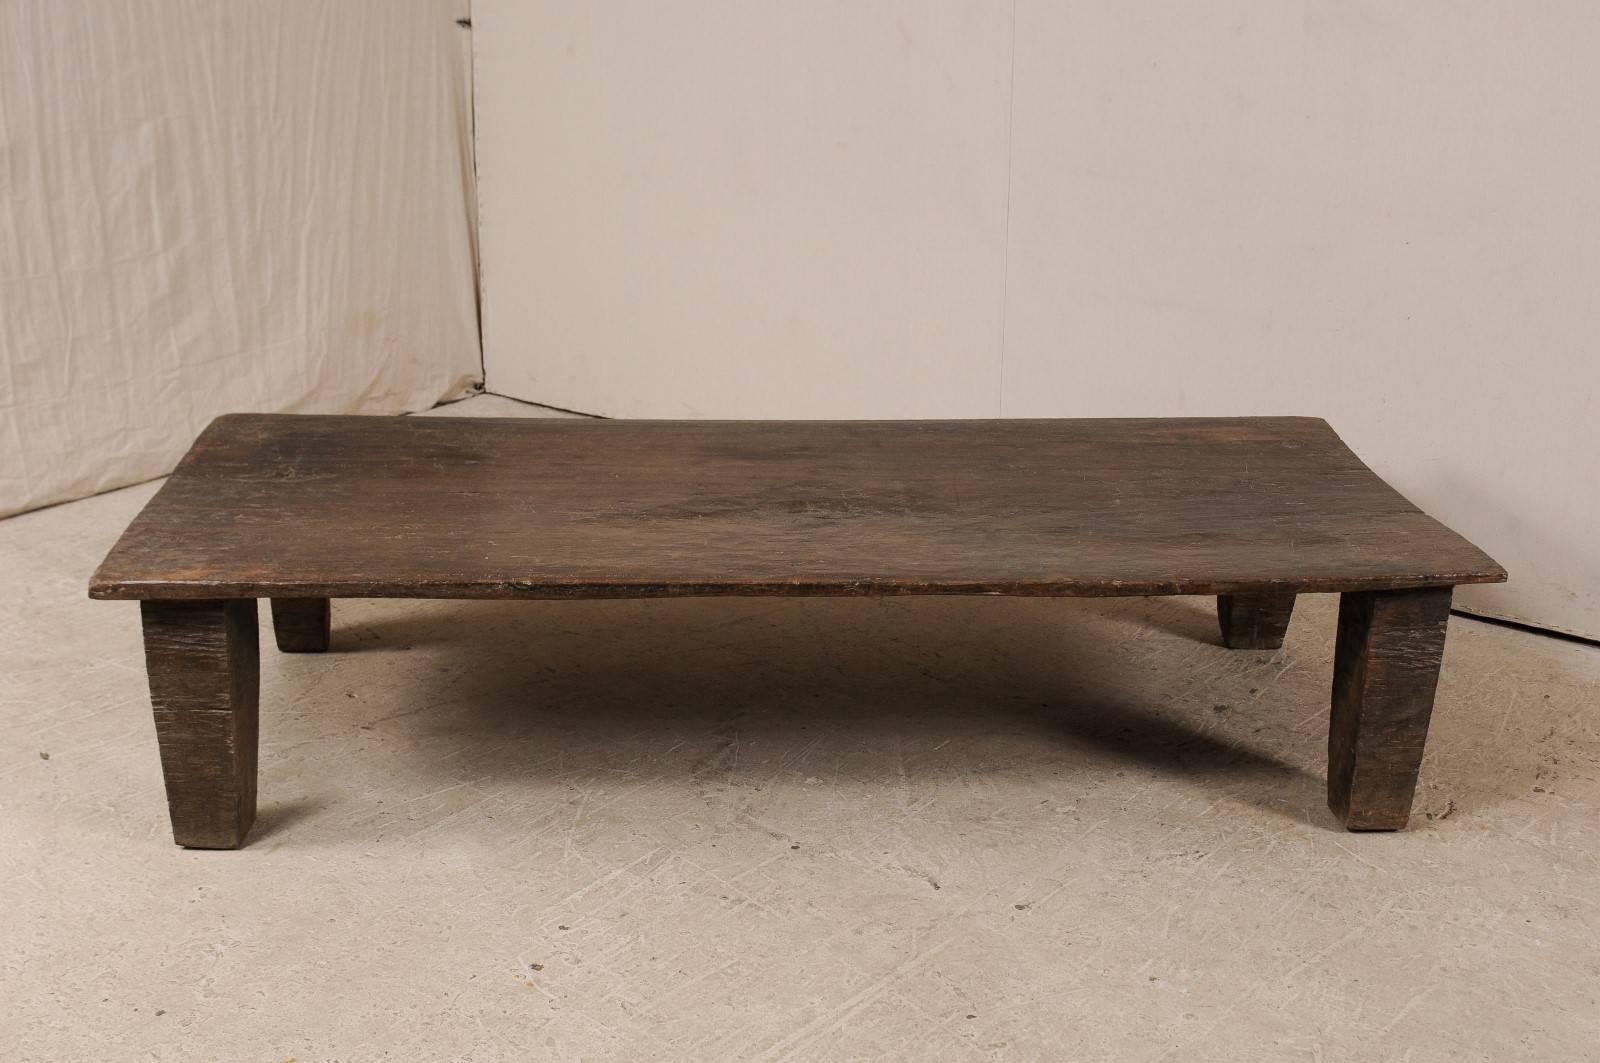 Indian Beautiful Rustic Primitive Naga Wood Coffee Table from the Tribes of North India